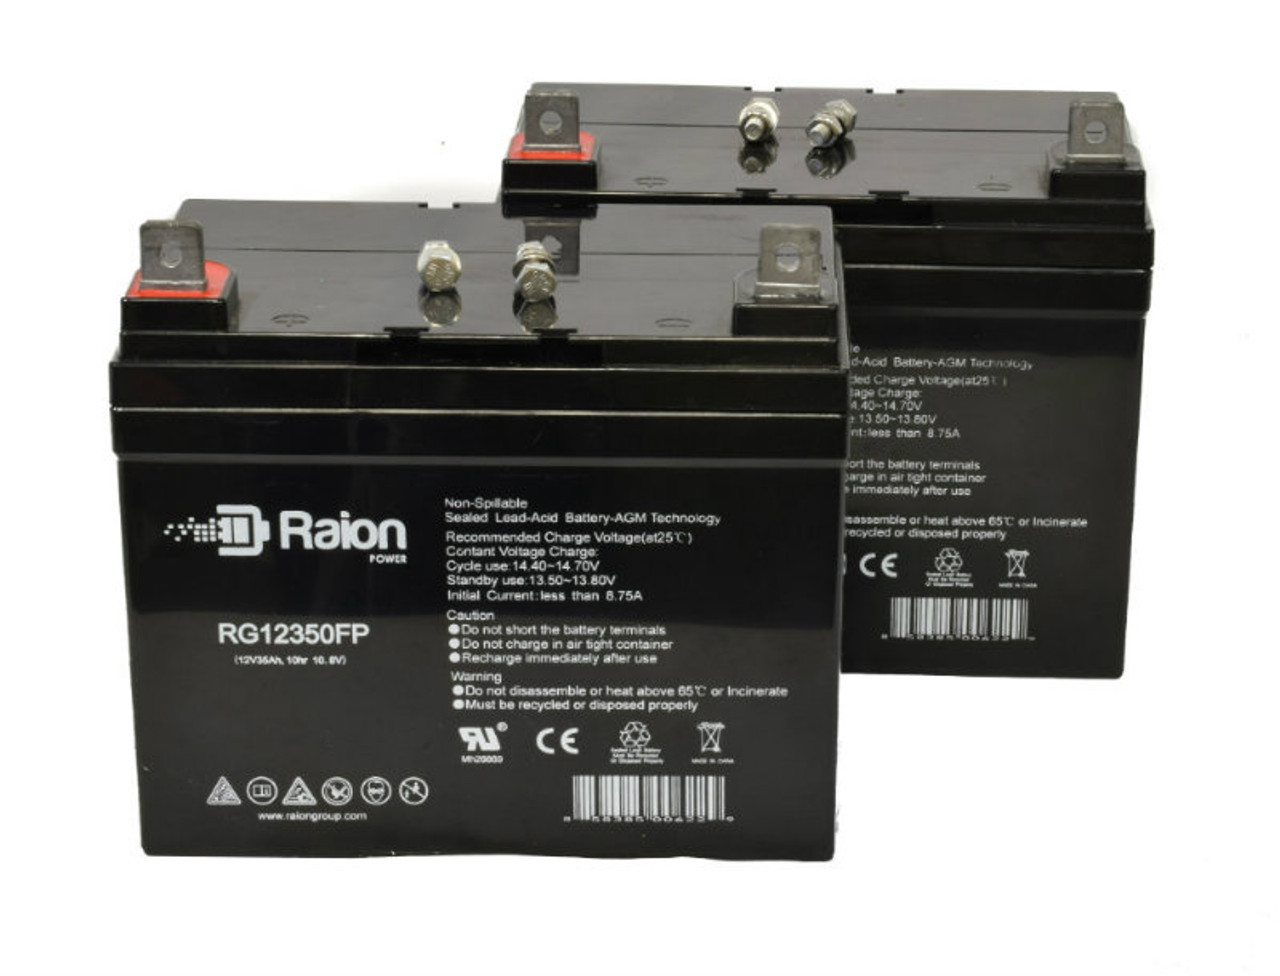 Raion Power Replacement 12V 35Ah Lawn Mower Battery for E.T. Rugg Co. 5088-E - 2 Pack